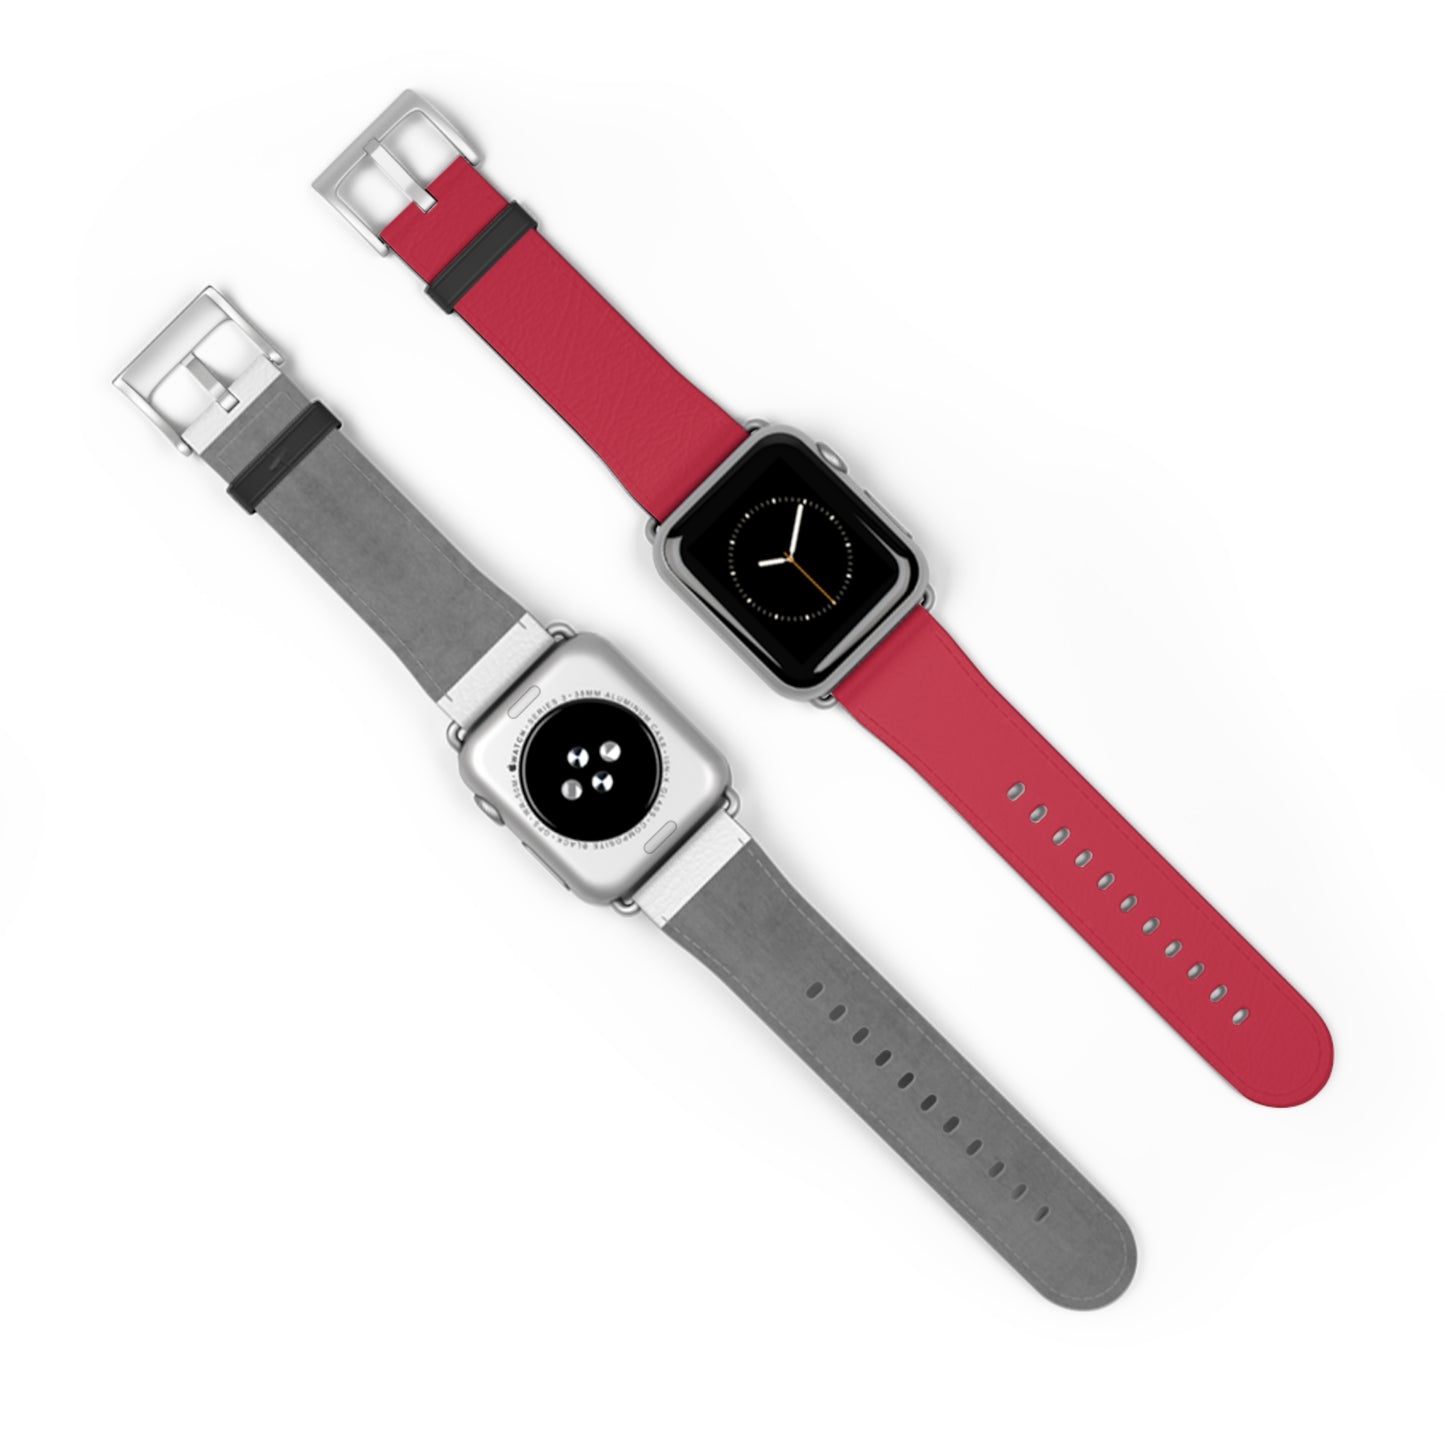 RED APPLE® WATCH BAND- PANTONE® 193